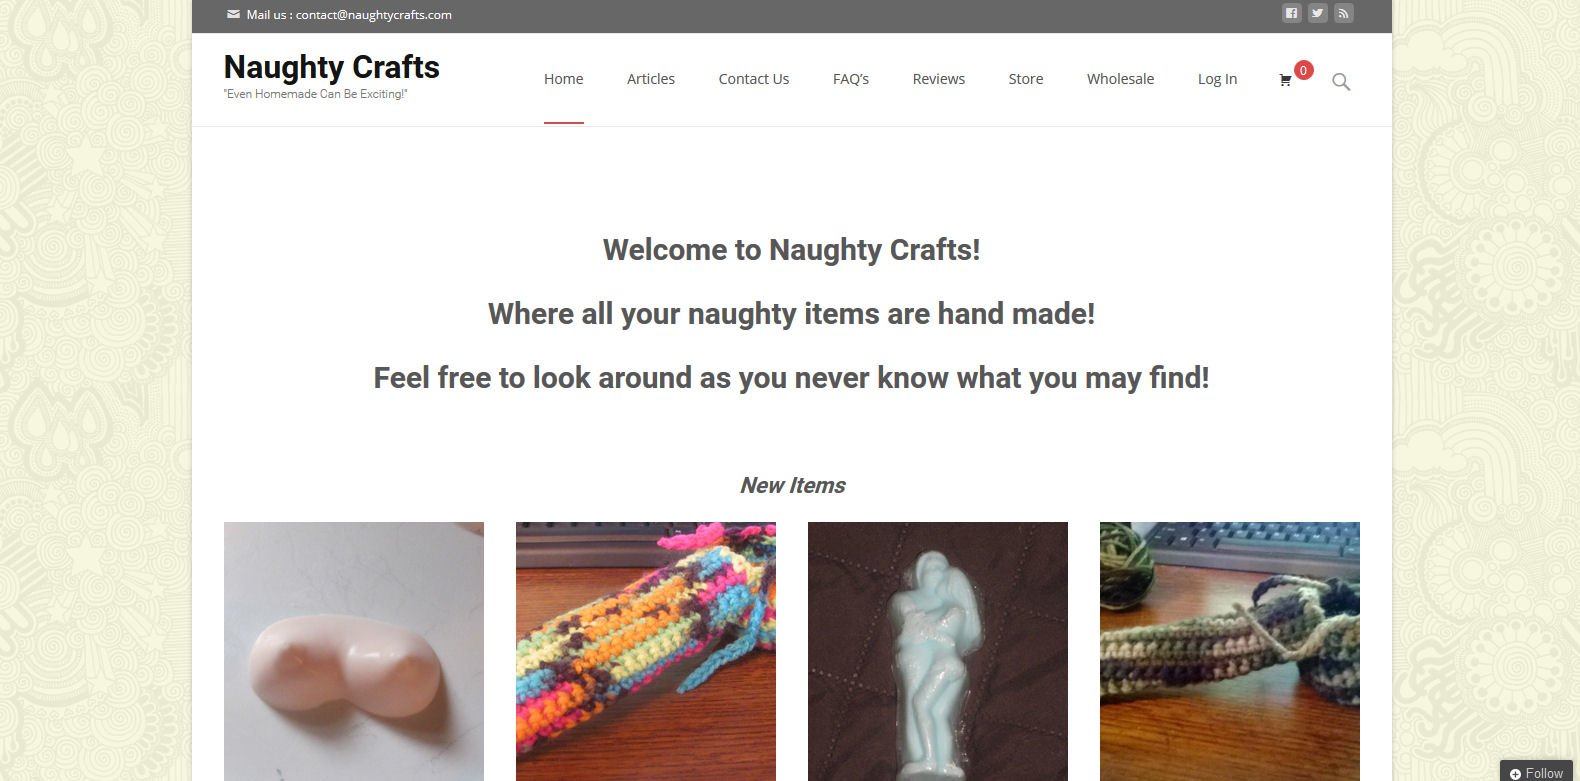 Naughty Crafts - IvyRose Creations